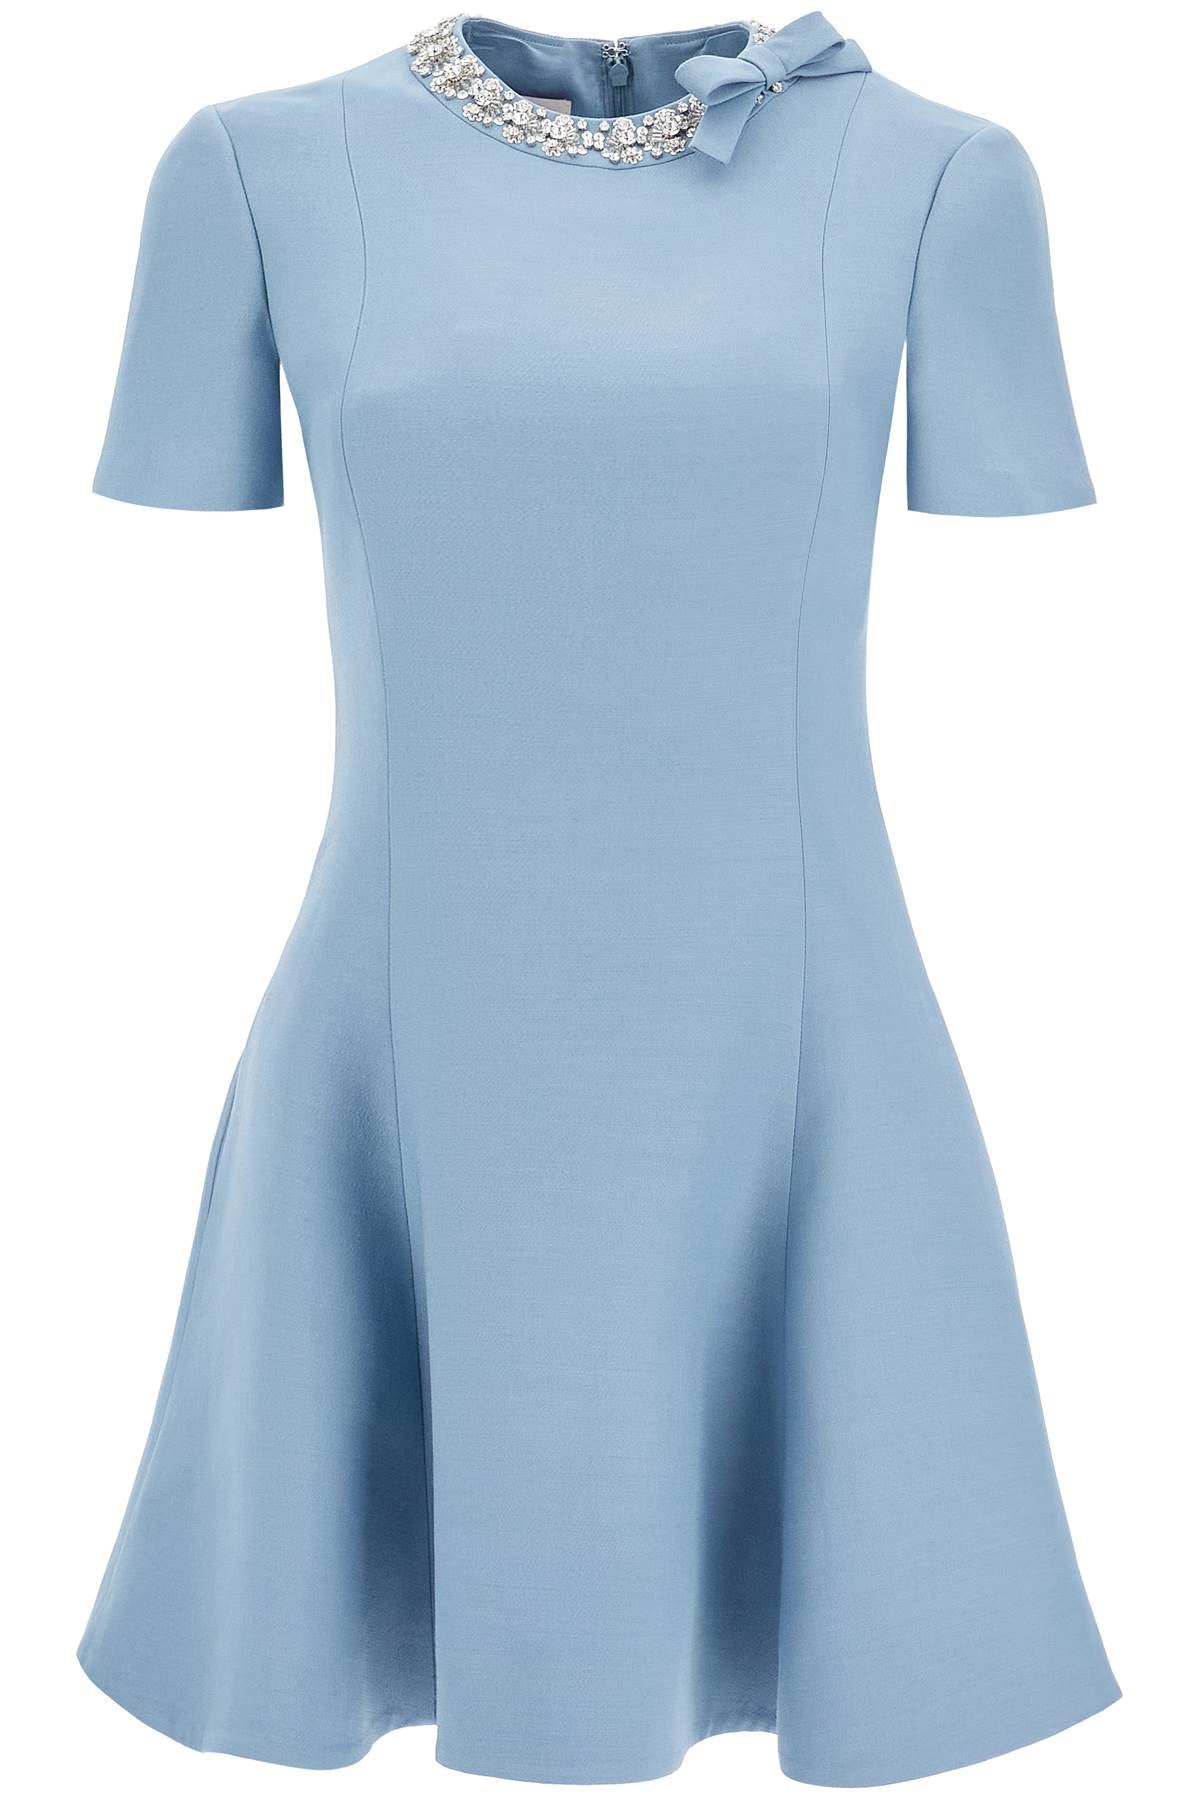 Valentino GARAVANI short crepe couture dress with embroidery - Light blue